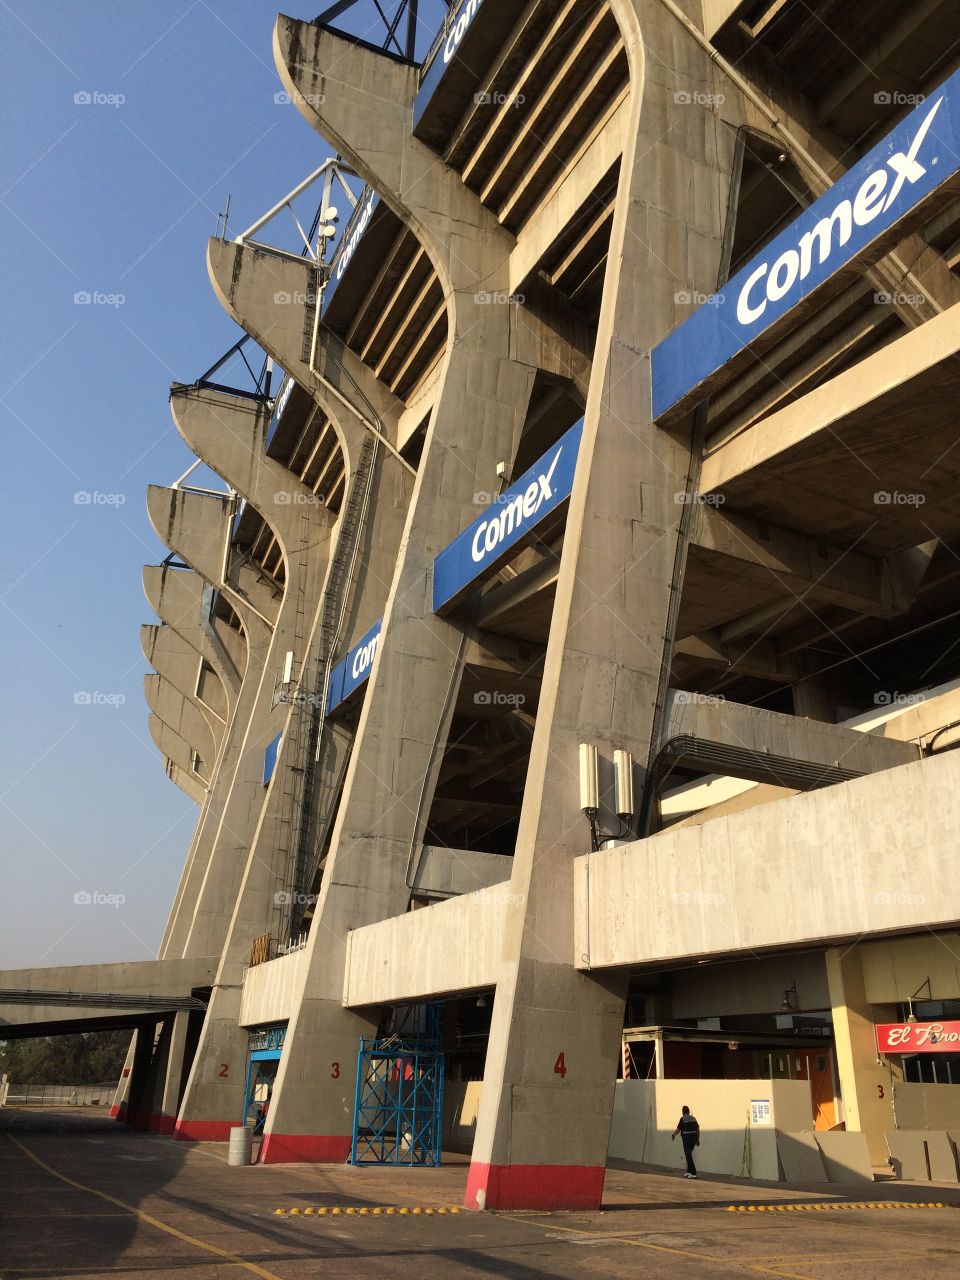 Detail from Azteca Stadium designed by Pedro Ramírez Vázquez, located in Mexico City